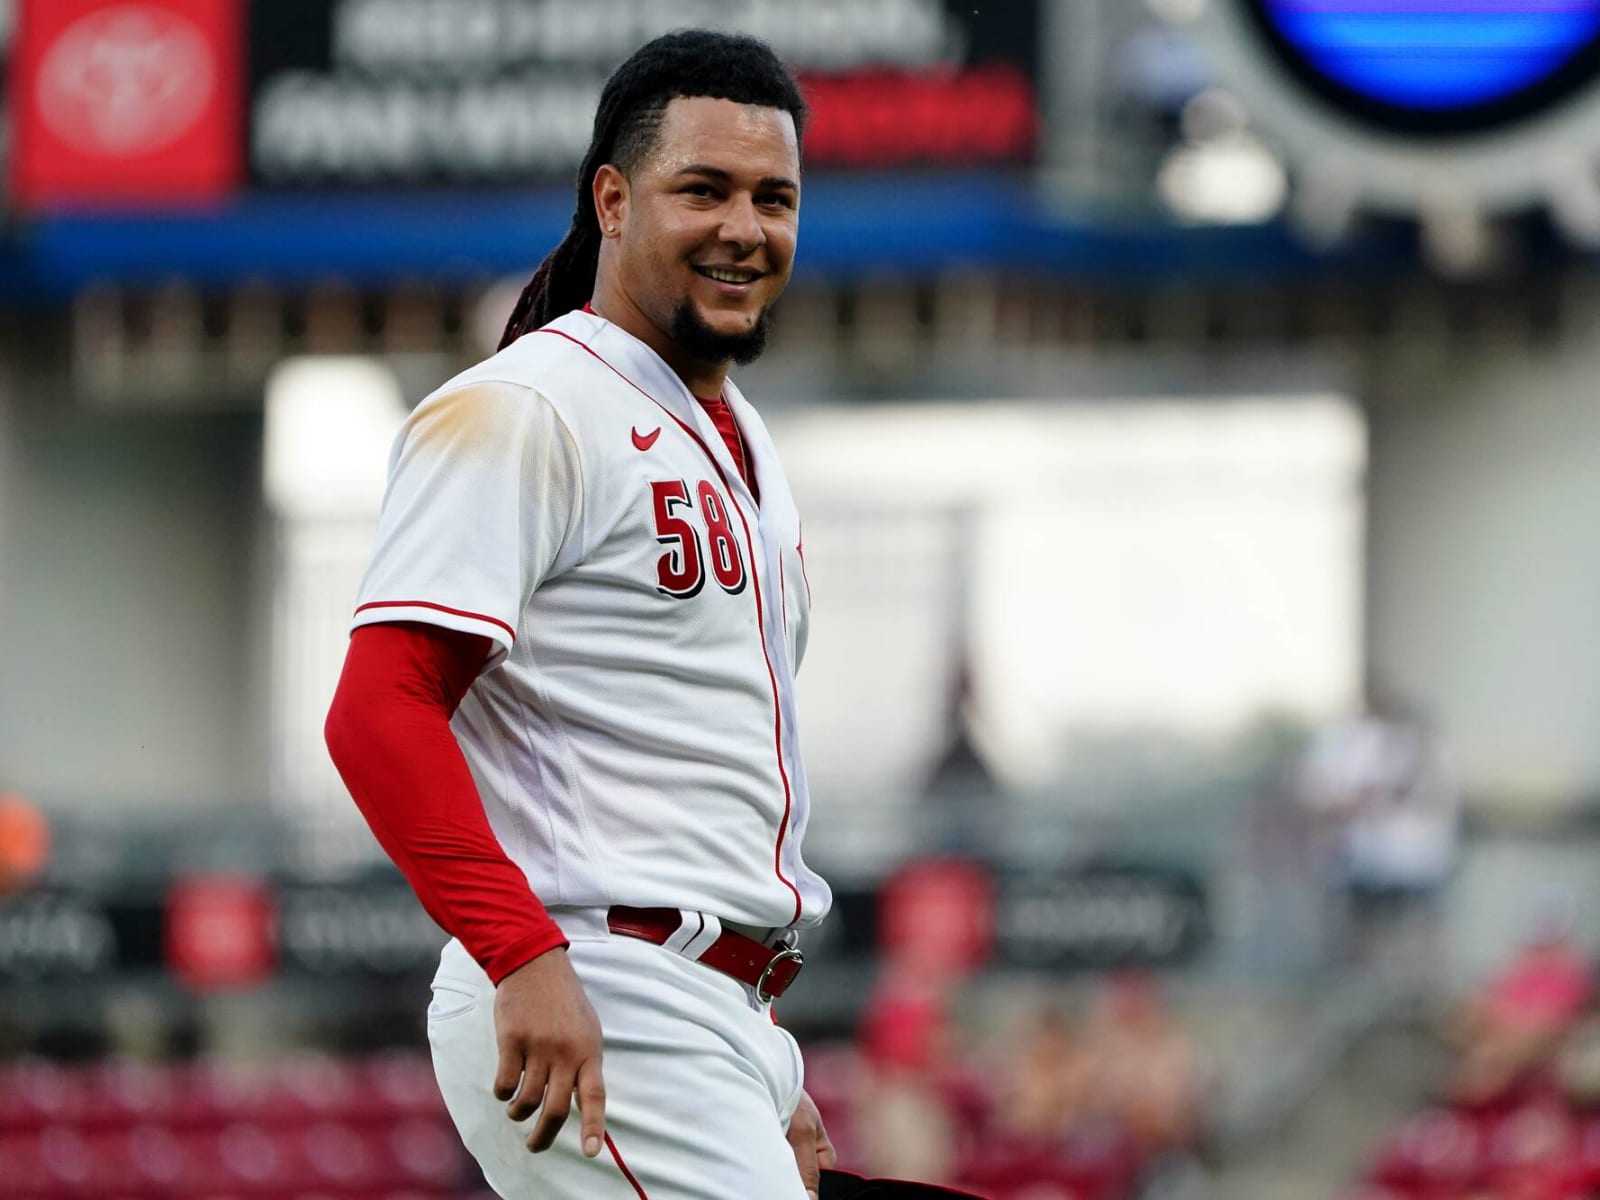 Mariners acquire Pitcher Luis Castillo From Reds in BLOCKBUSTER TRADE